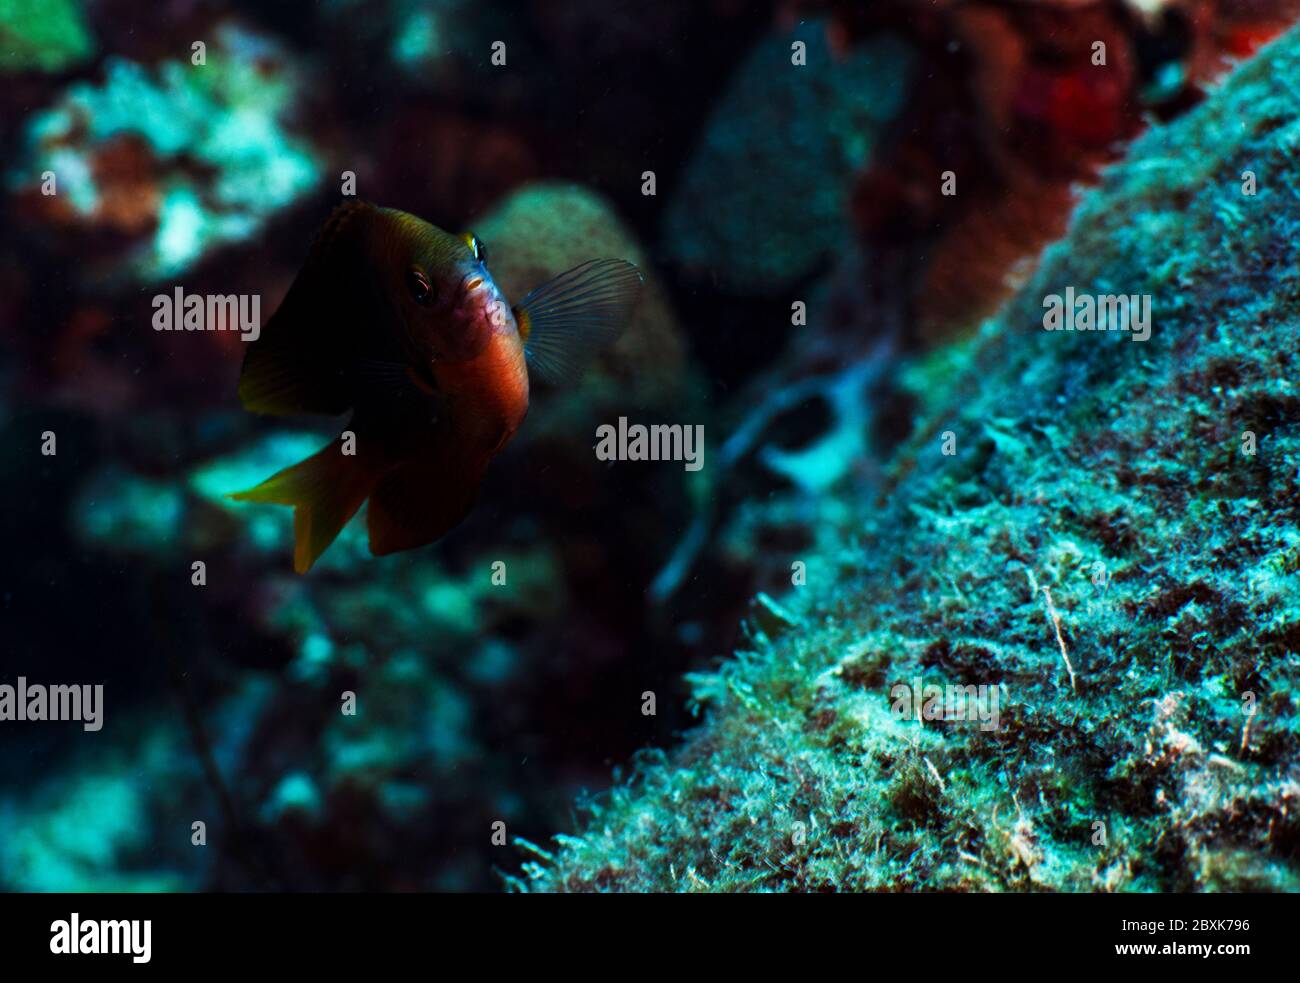 A bicolor damselfish on the Reef in Bonaire, Netherlands. The scientific name is stegastes partitus. Stock Photo